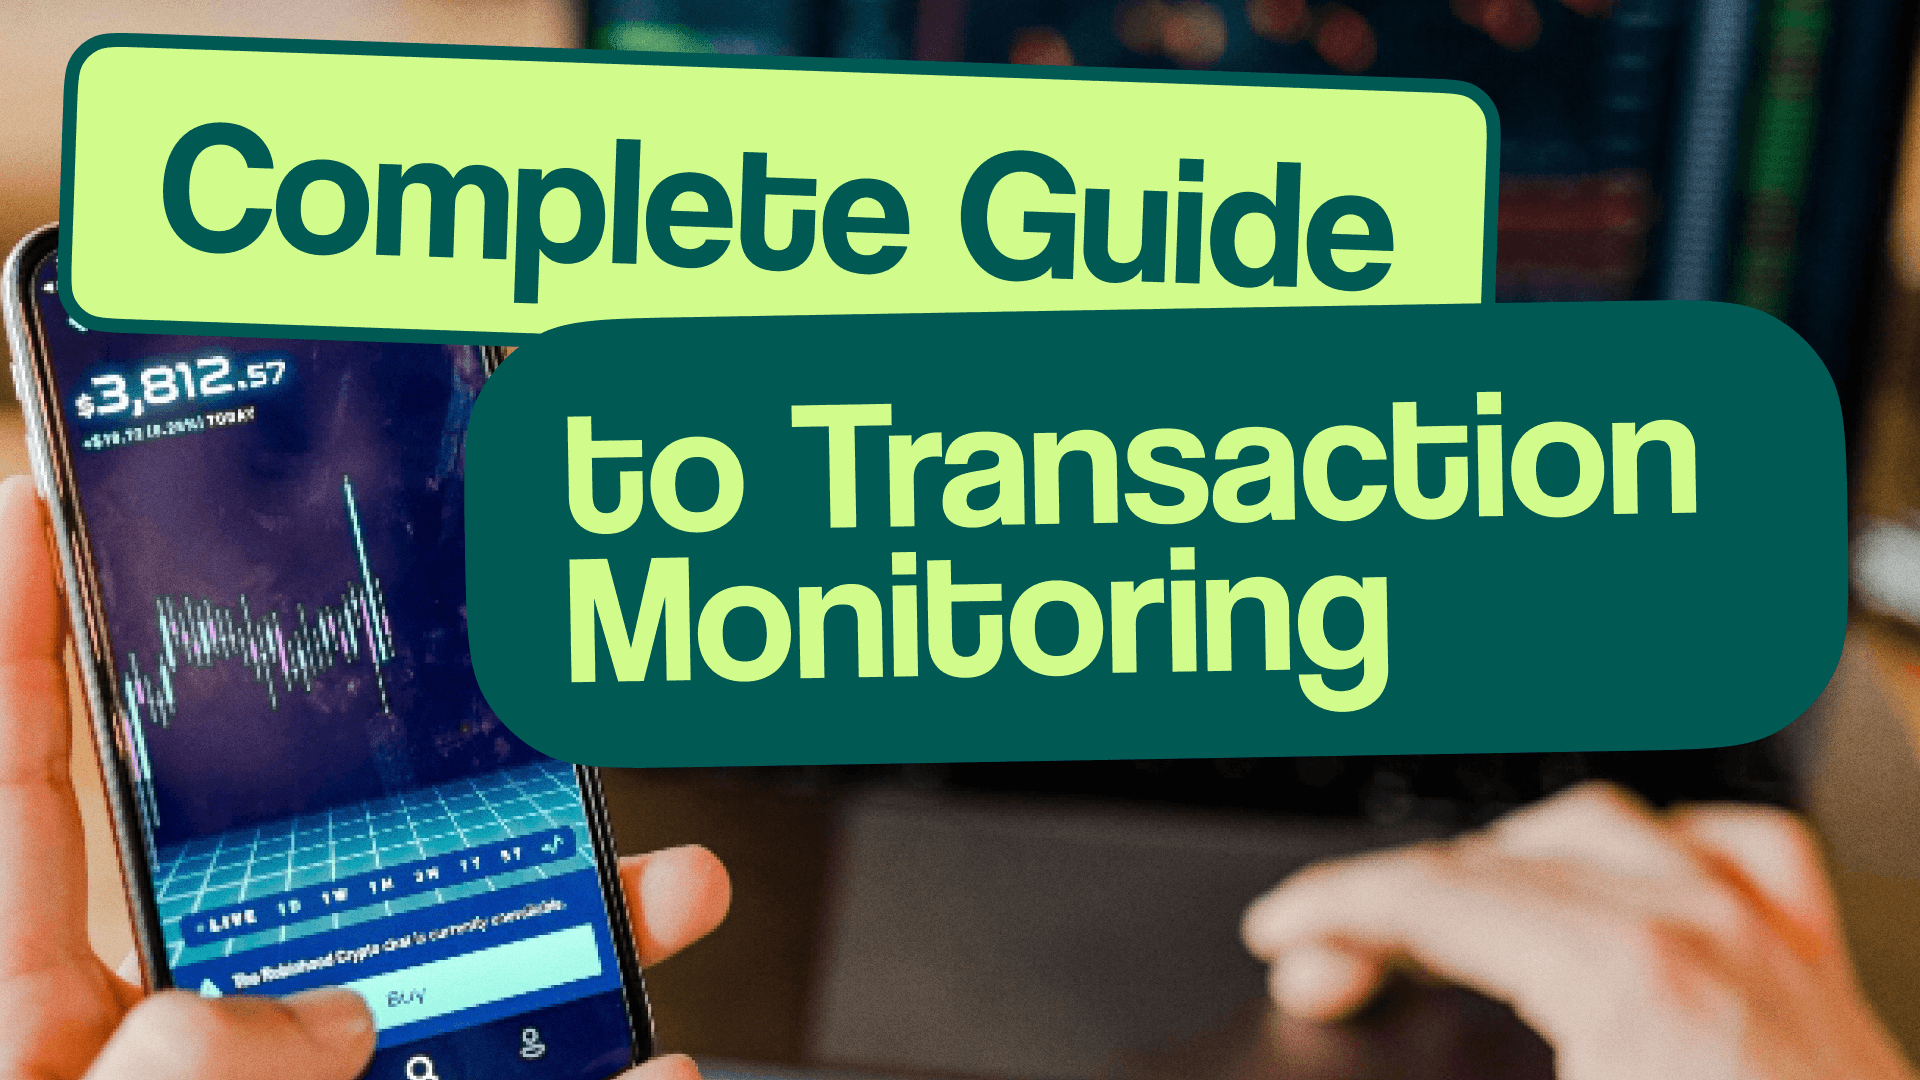 The complete guide to monitoring transactions